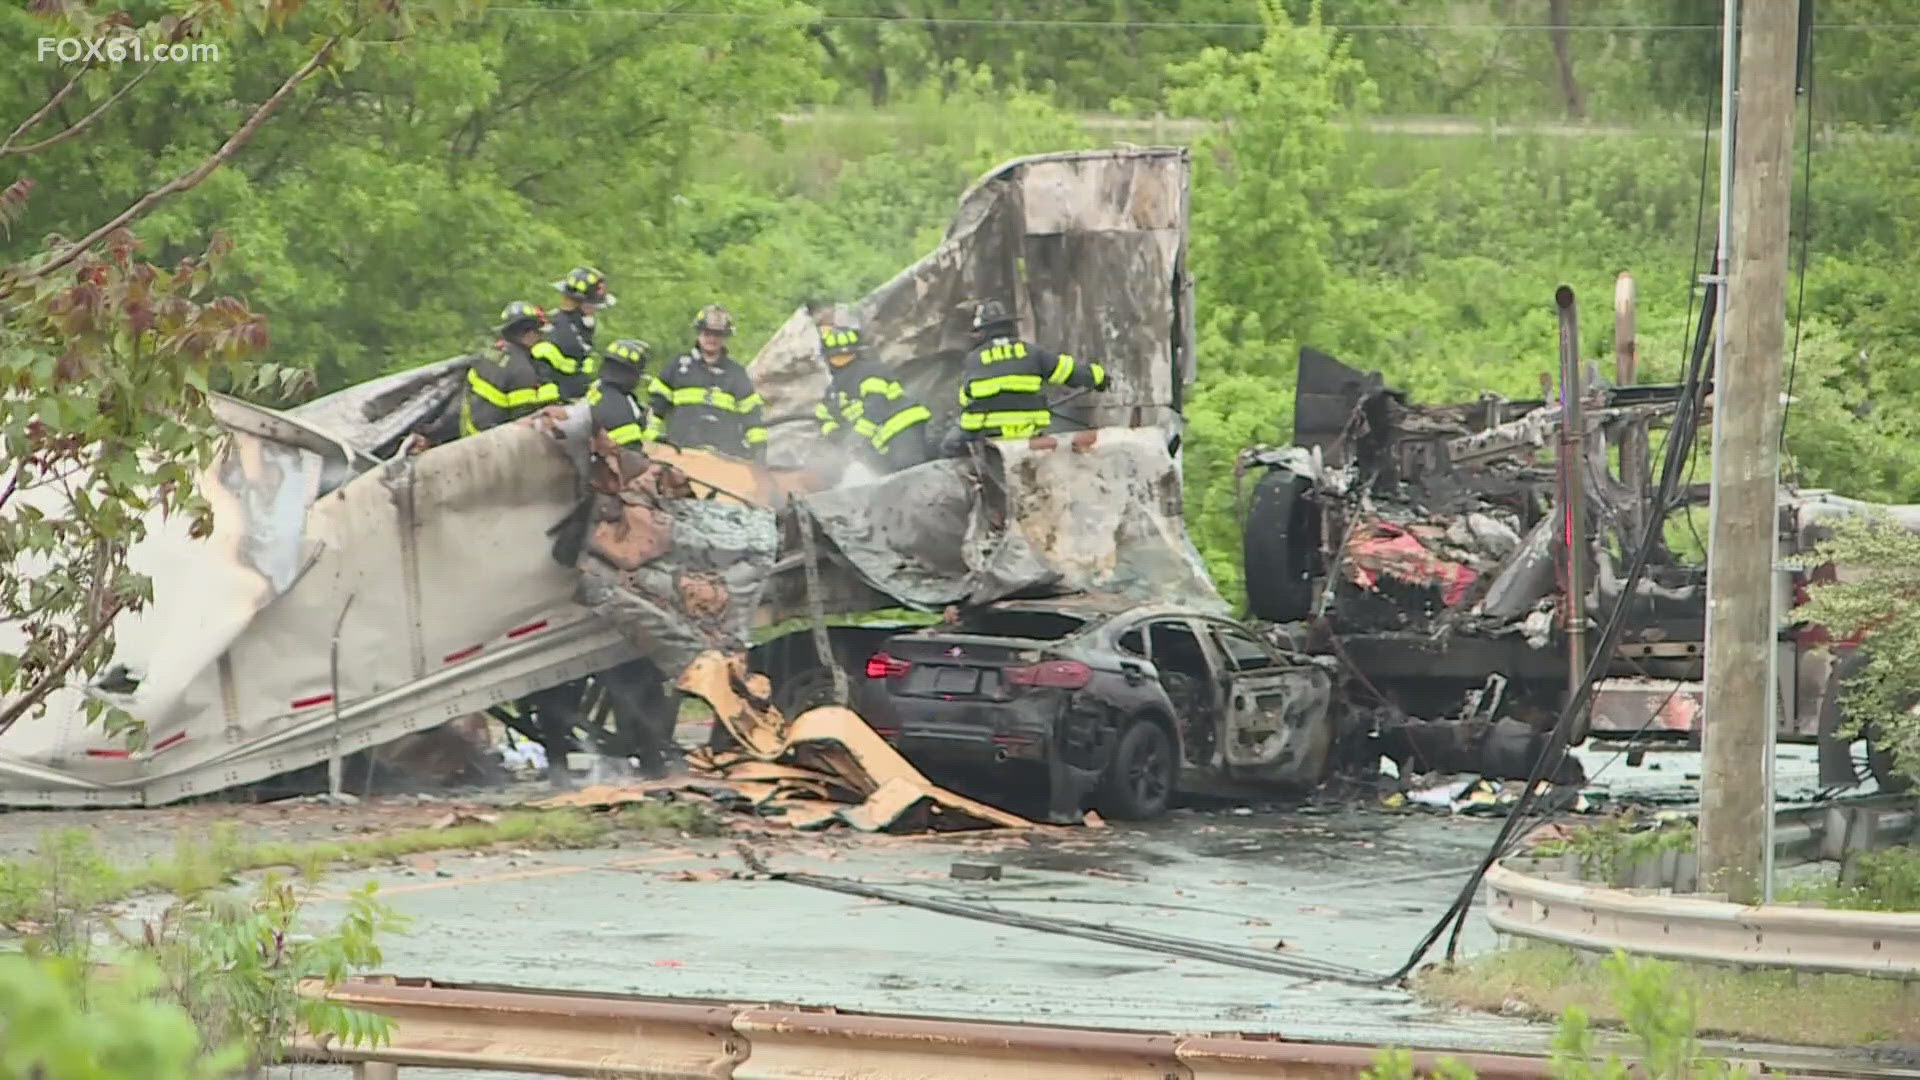 A black BMW crashed into the passenger side of a tractor trailer, resulting in a fire that caused significant damage.